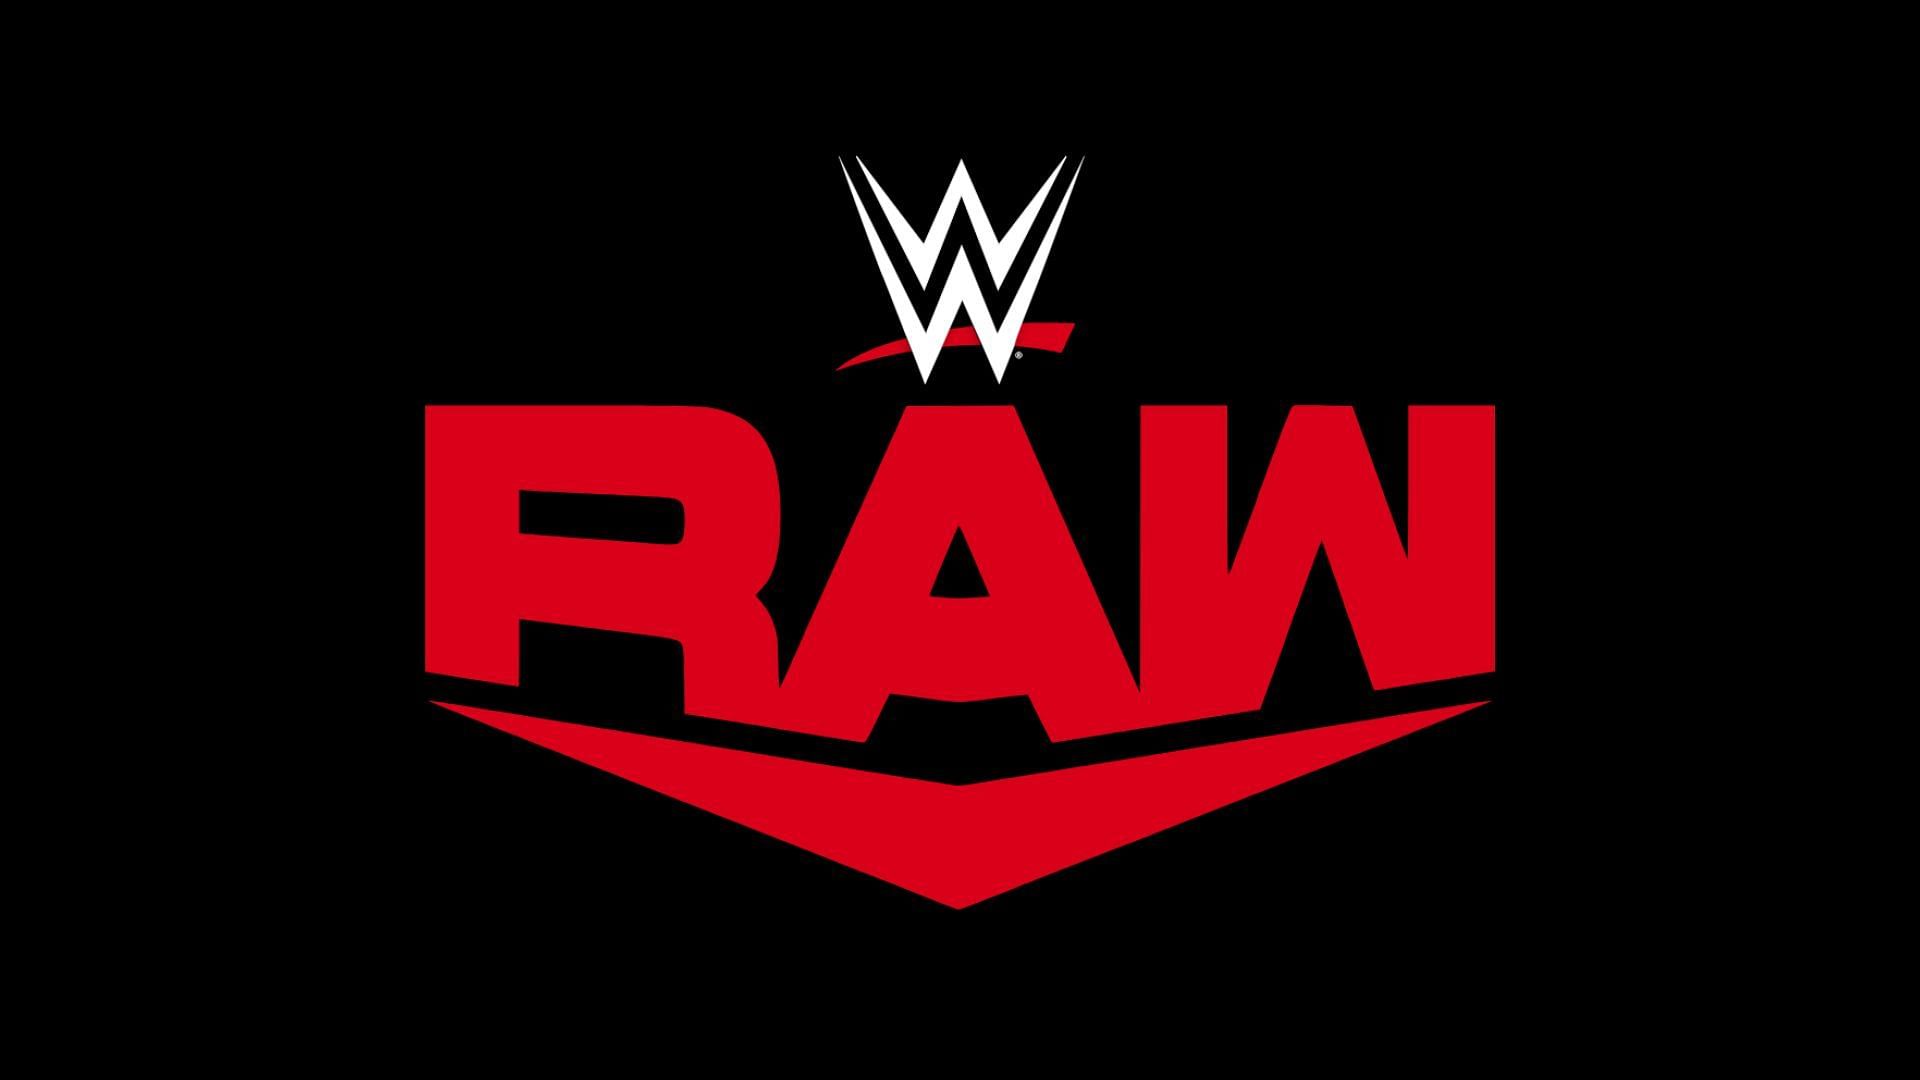 RAW has been WWE